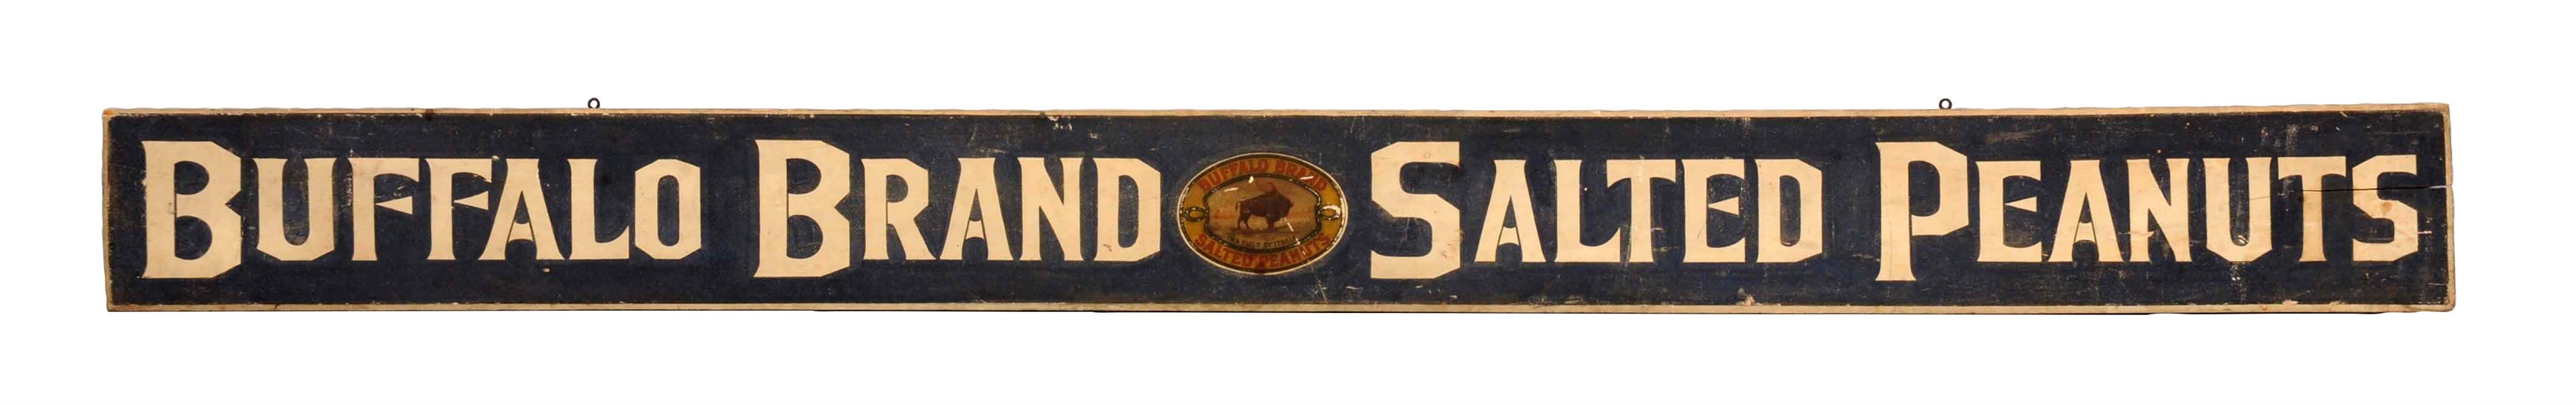 BUFFALO BRAND SALTED PEANUTS WOODEN ADVERTISING TRADE SIGN.